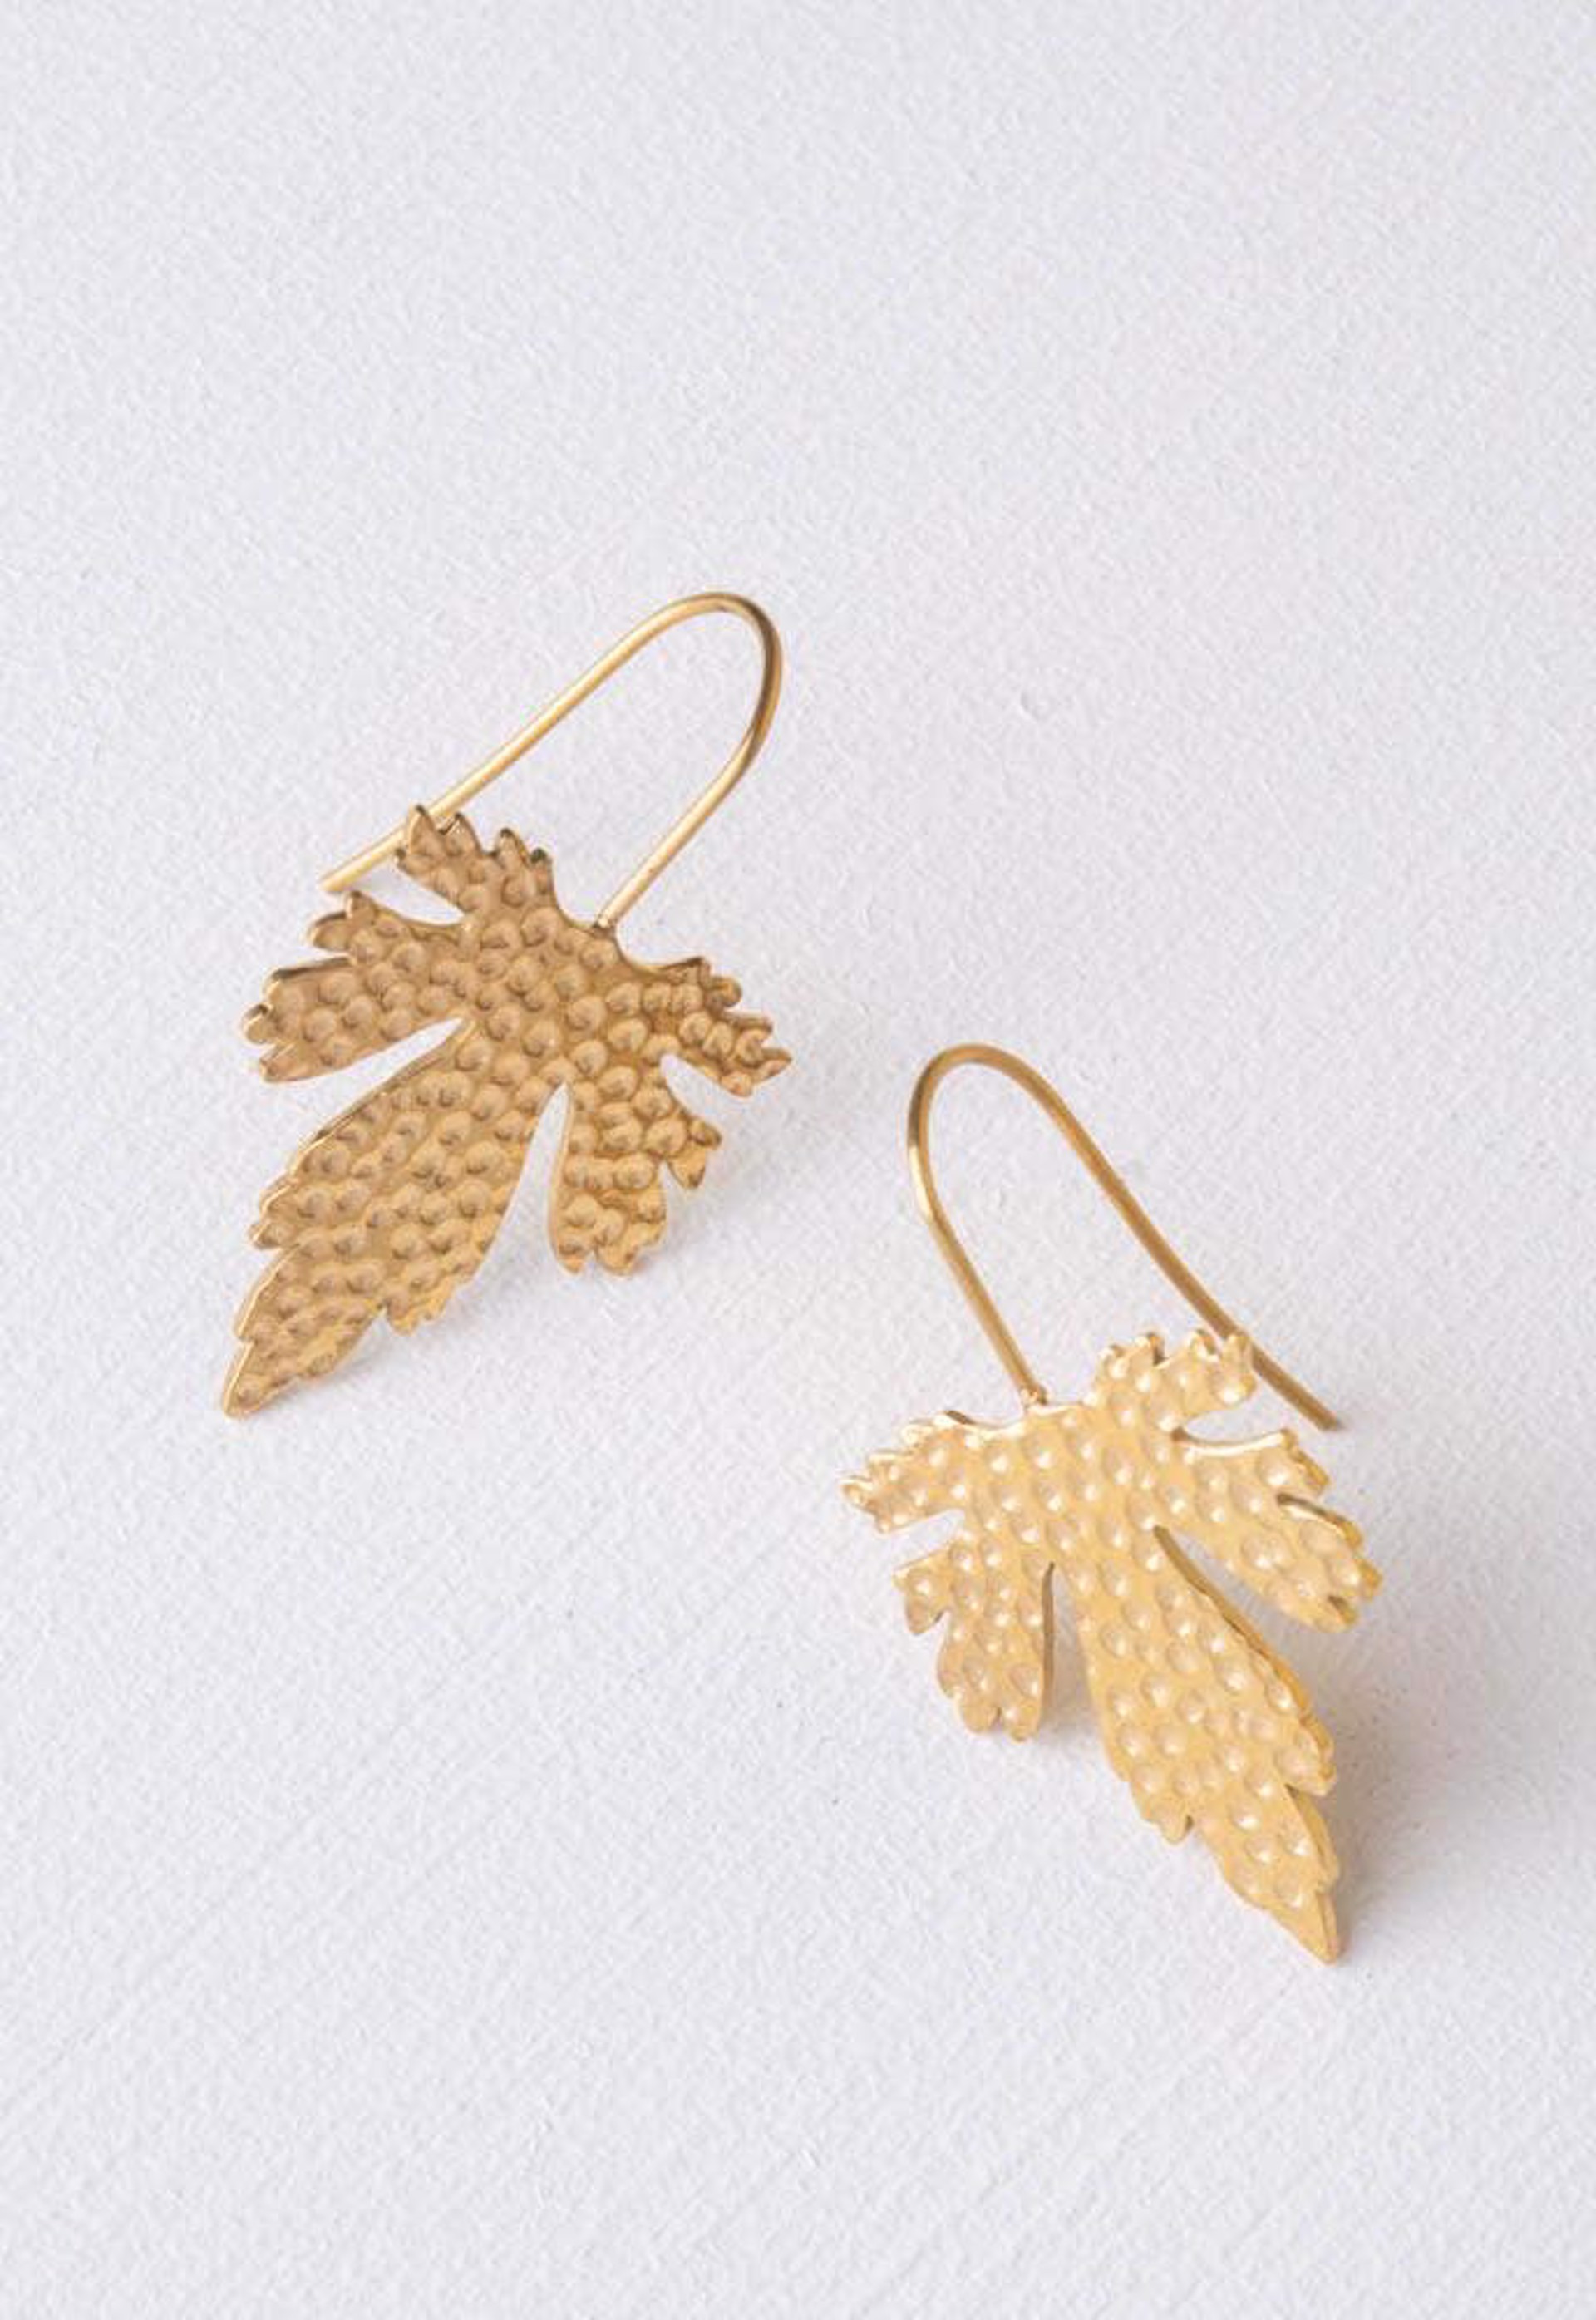 New Leaf Maple Earrings by Starfish Project